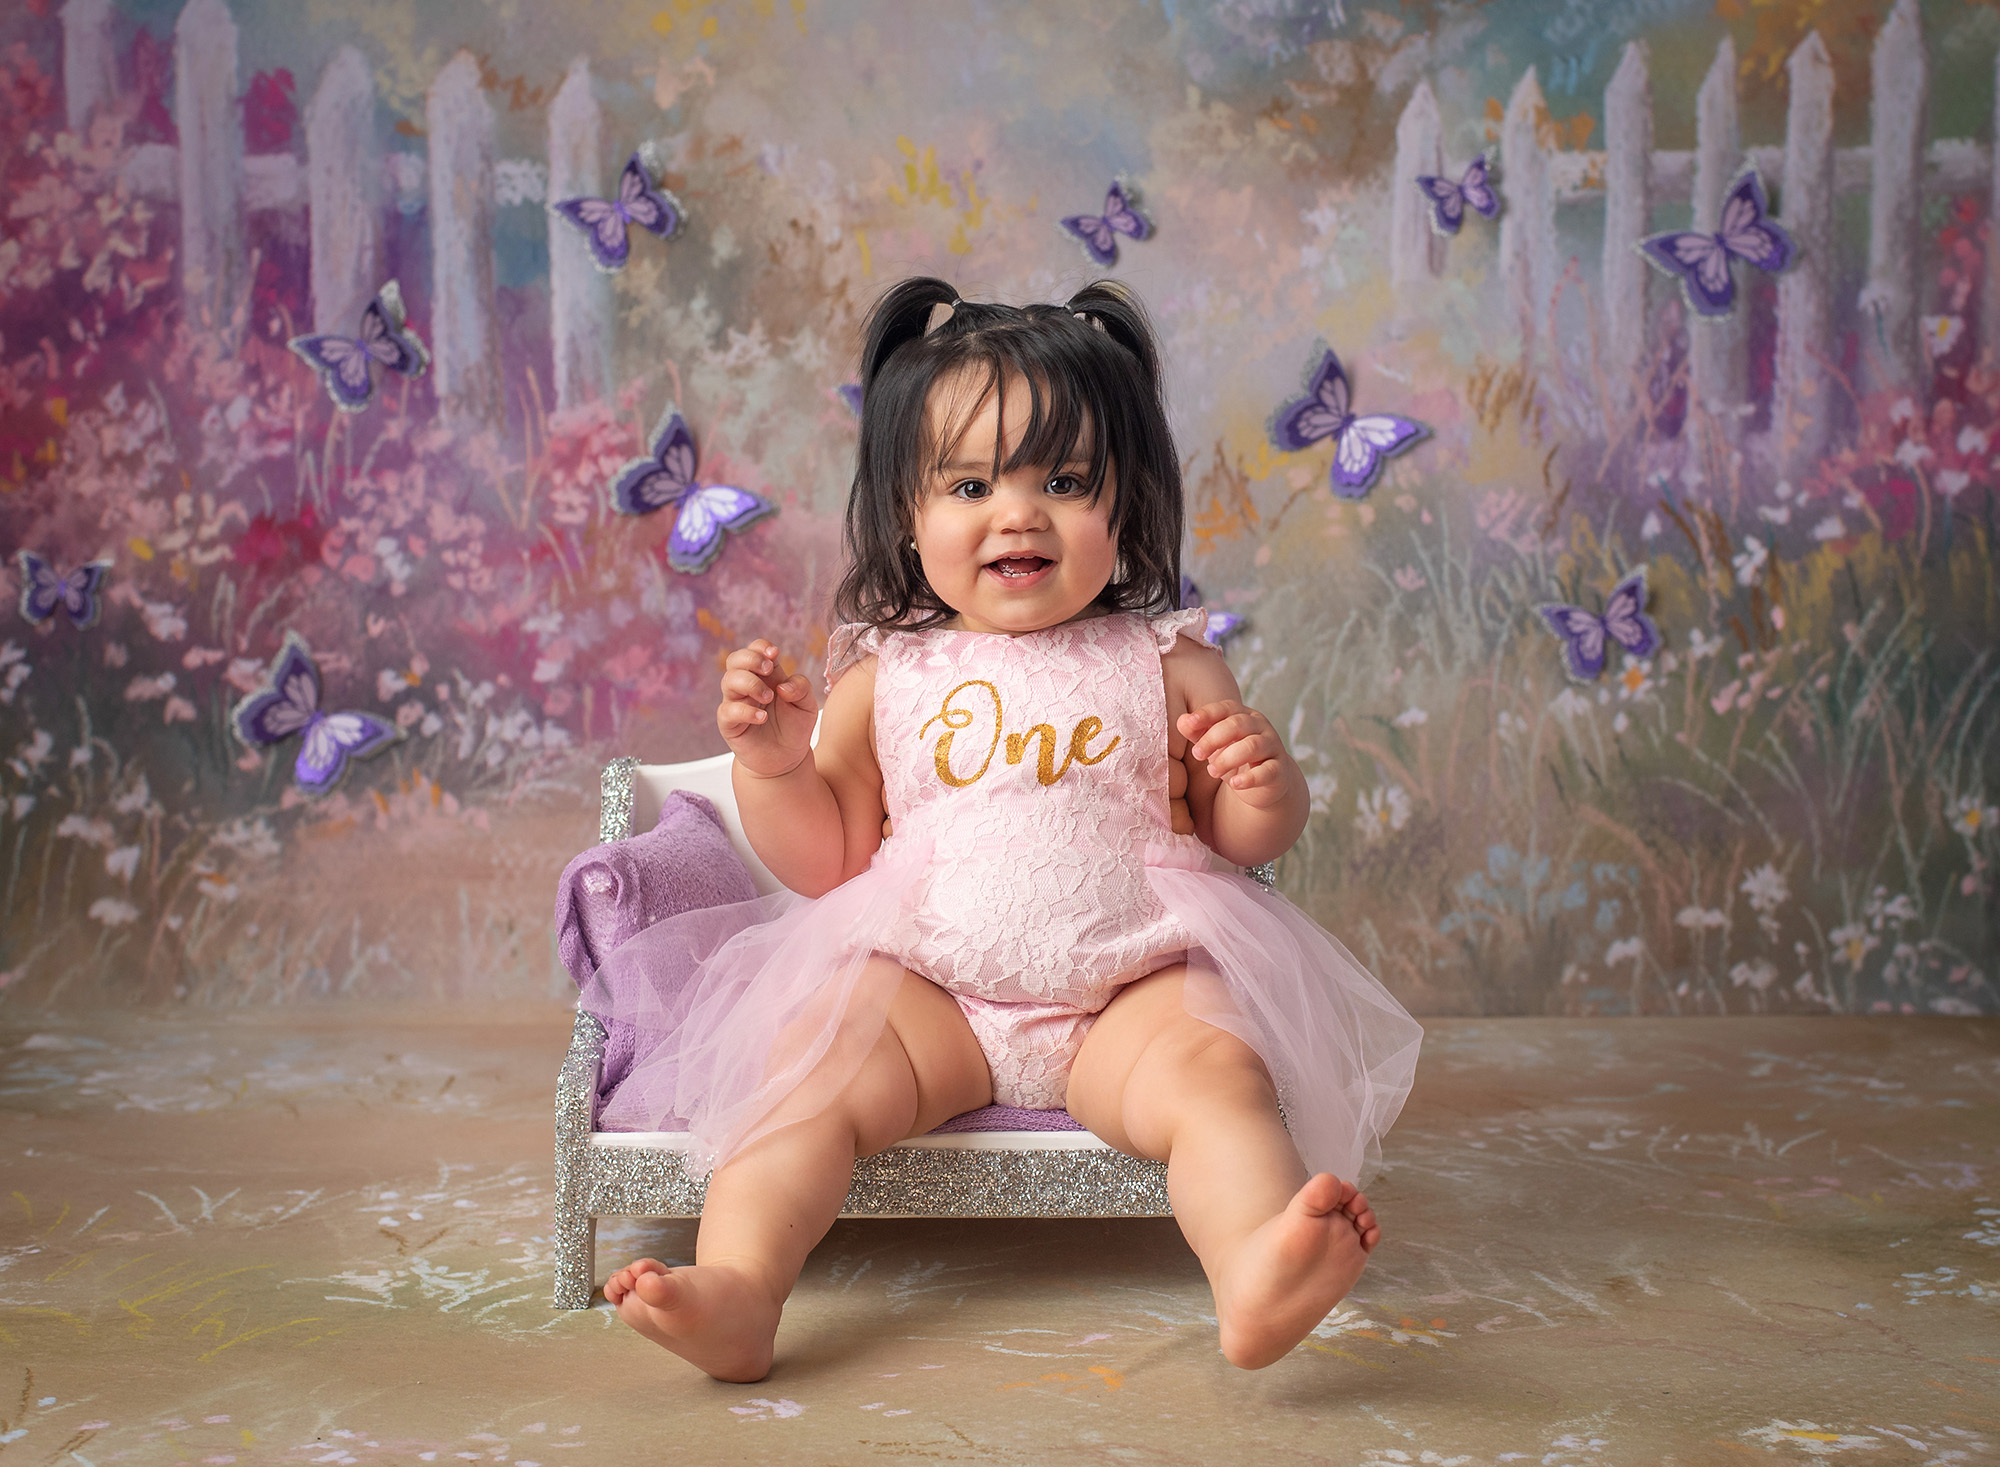 Butterfly Cake Smash Pictures one year old baby girl in pigtails dressed in pink laced dress with butterfly background